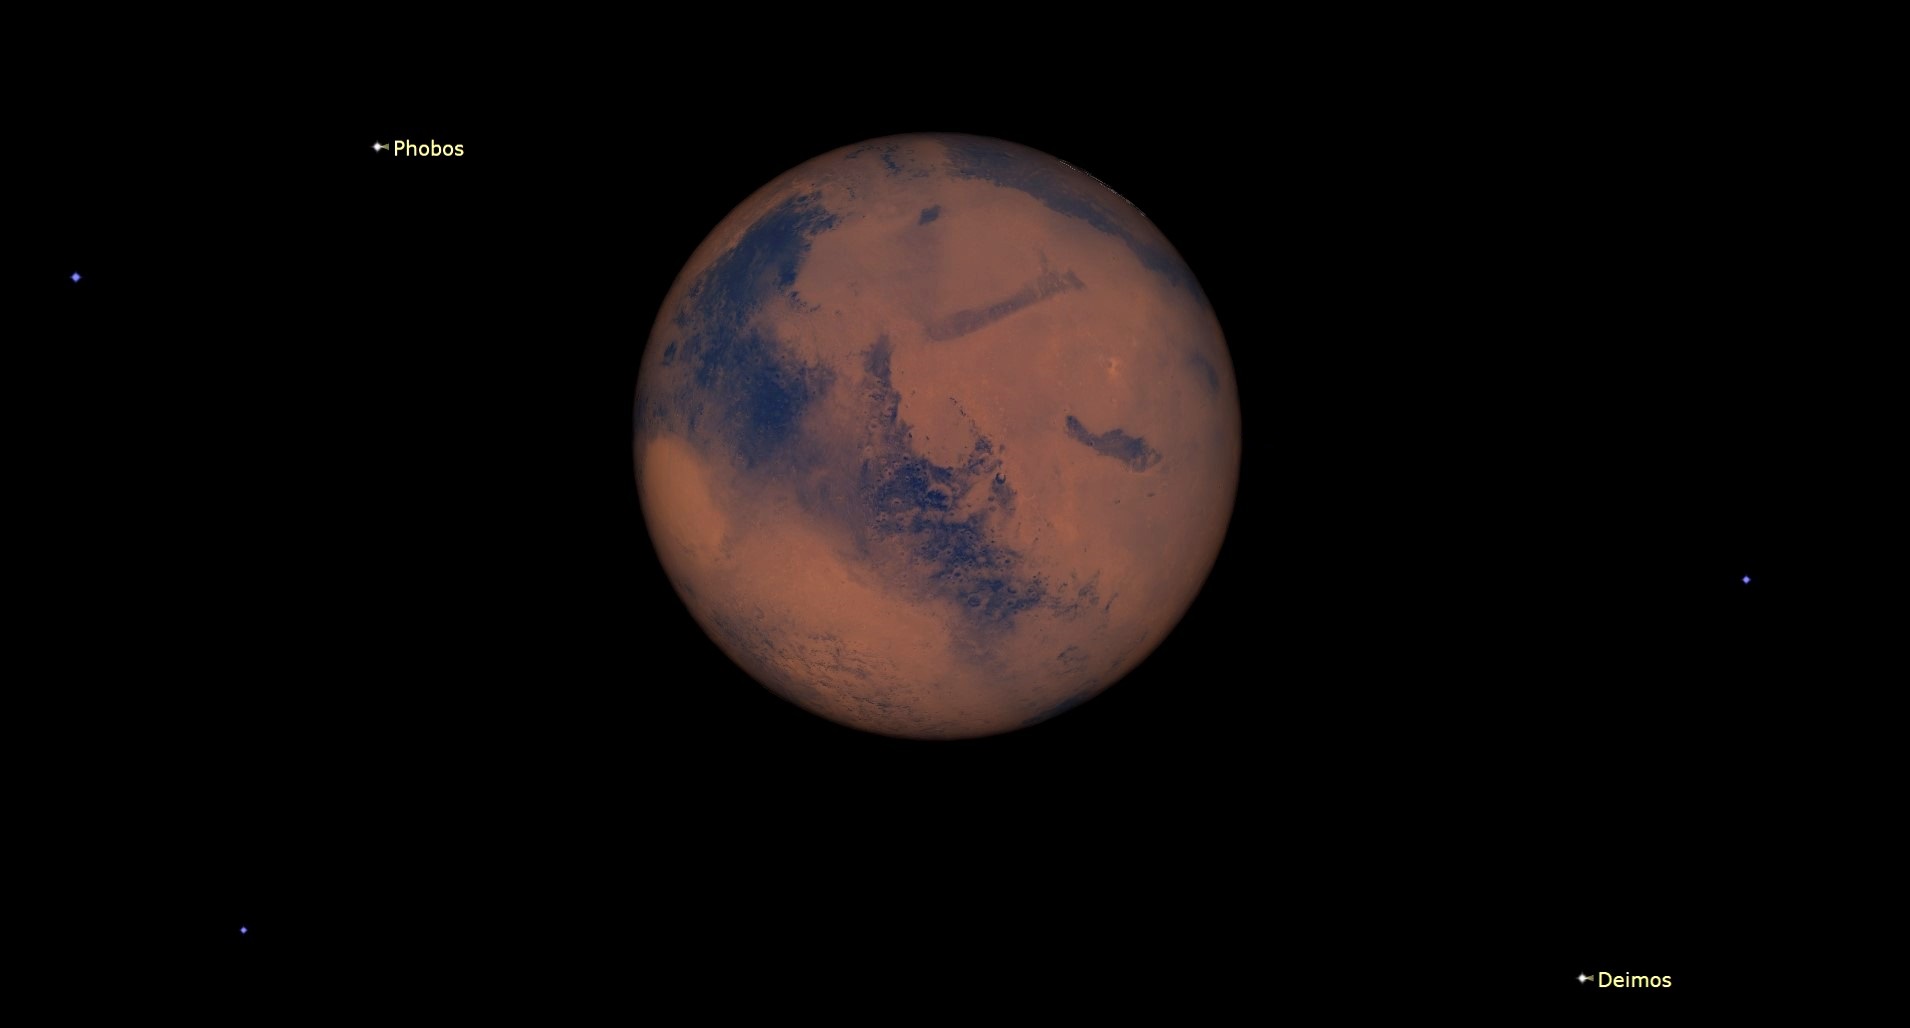 Mars was at its closest proximity to Earth on Dec. 1 at a distance of 50.61 million miles, 81.446 million km, or 4.5 light-minutes.